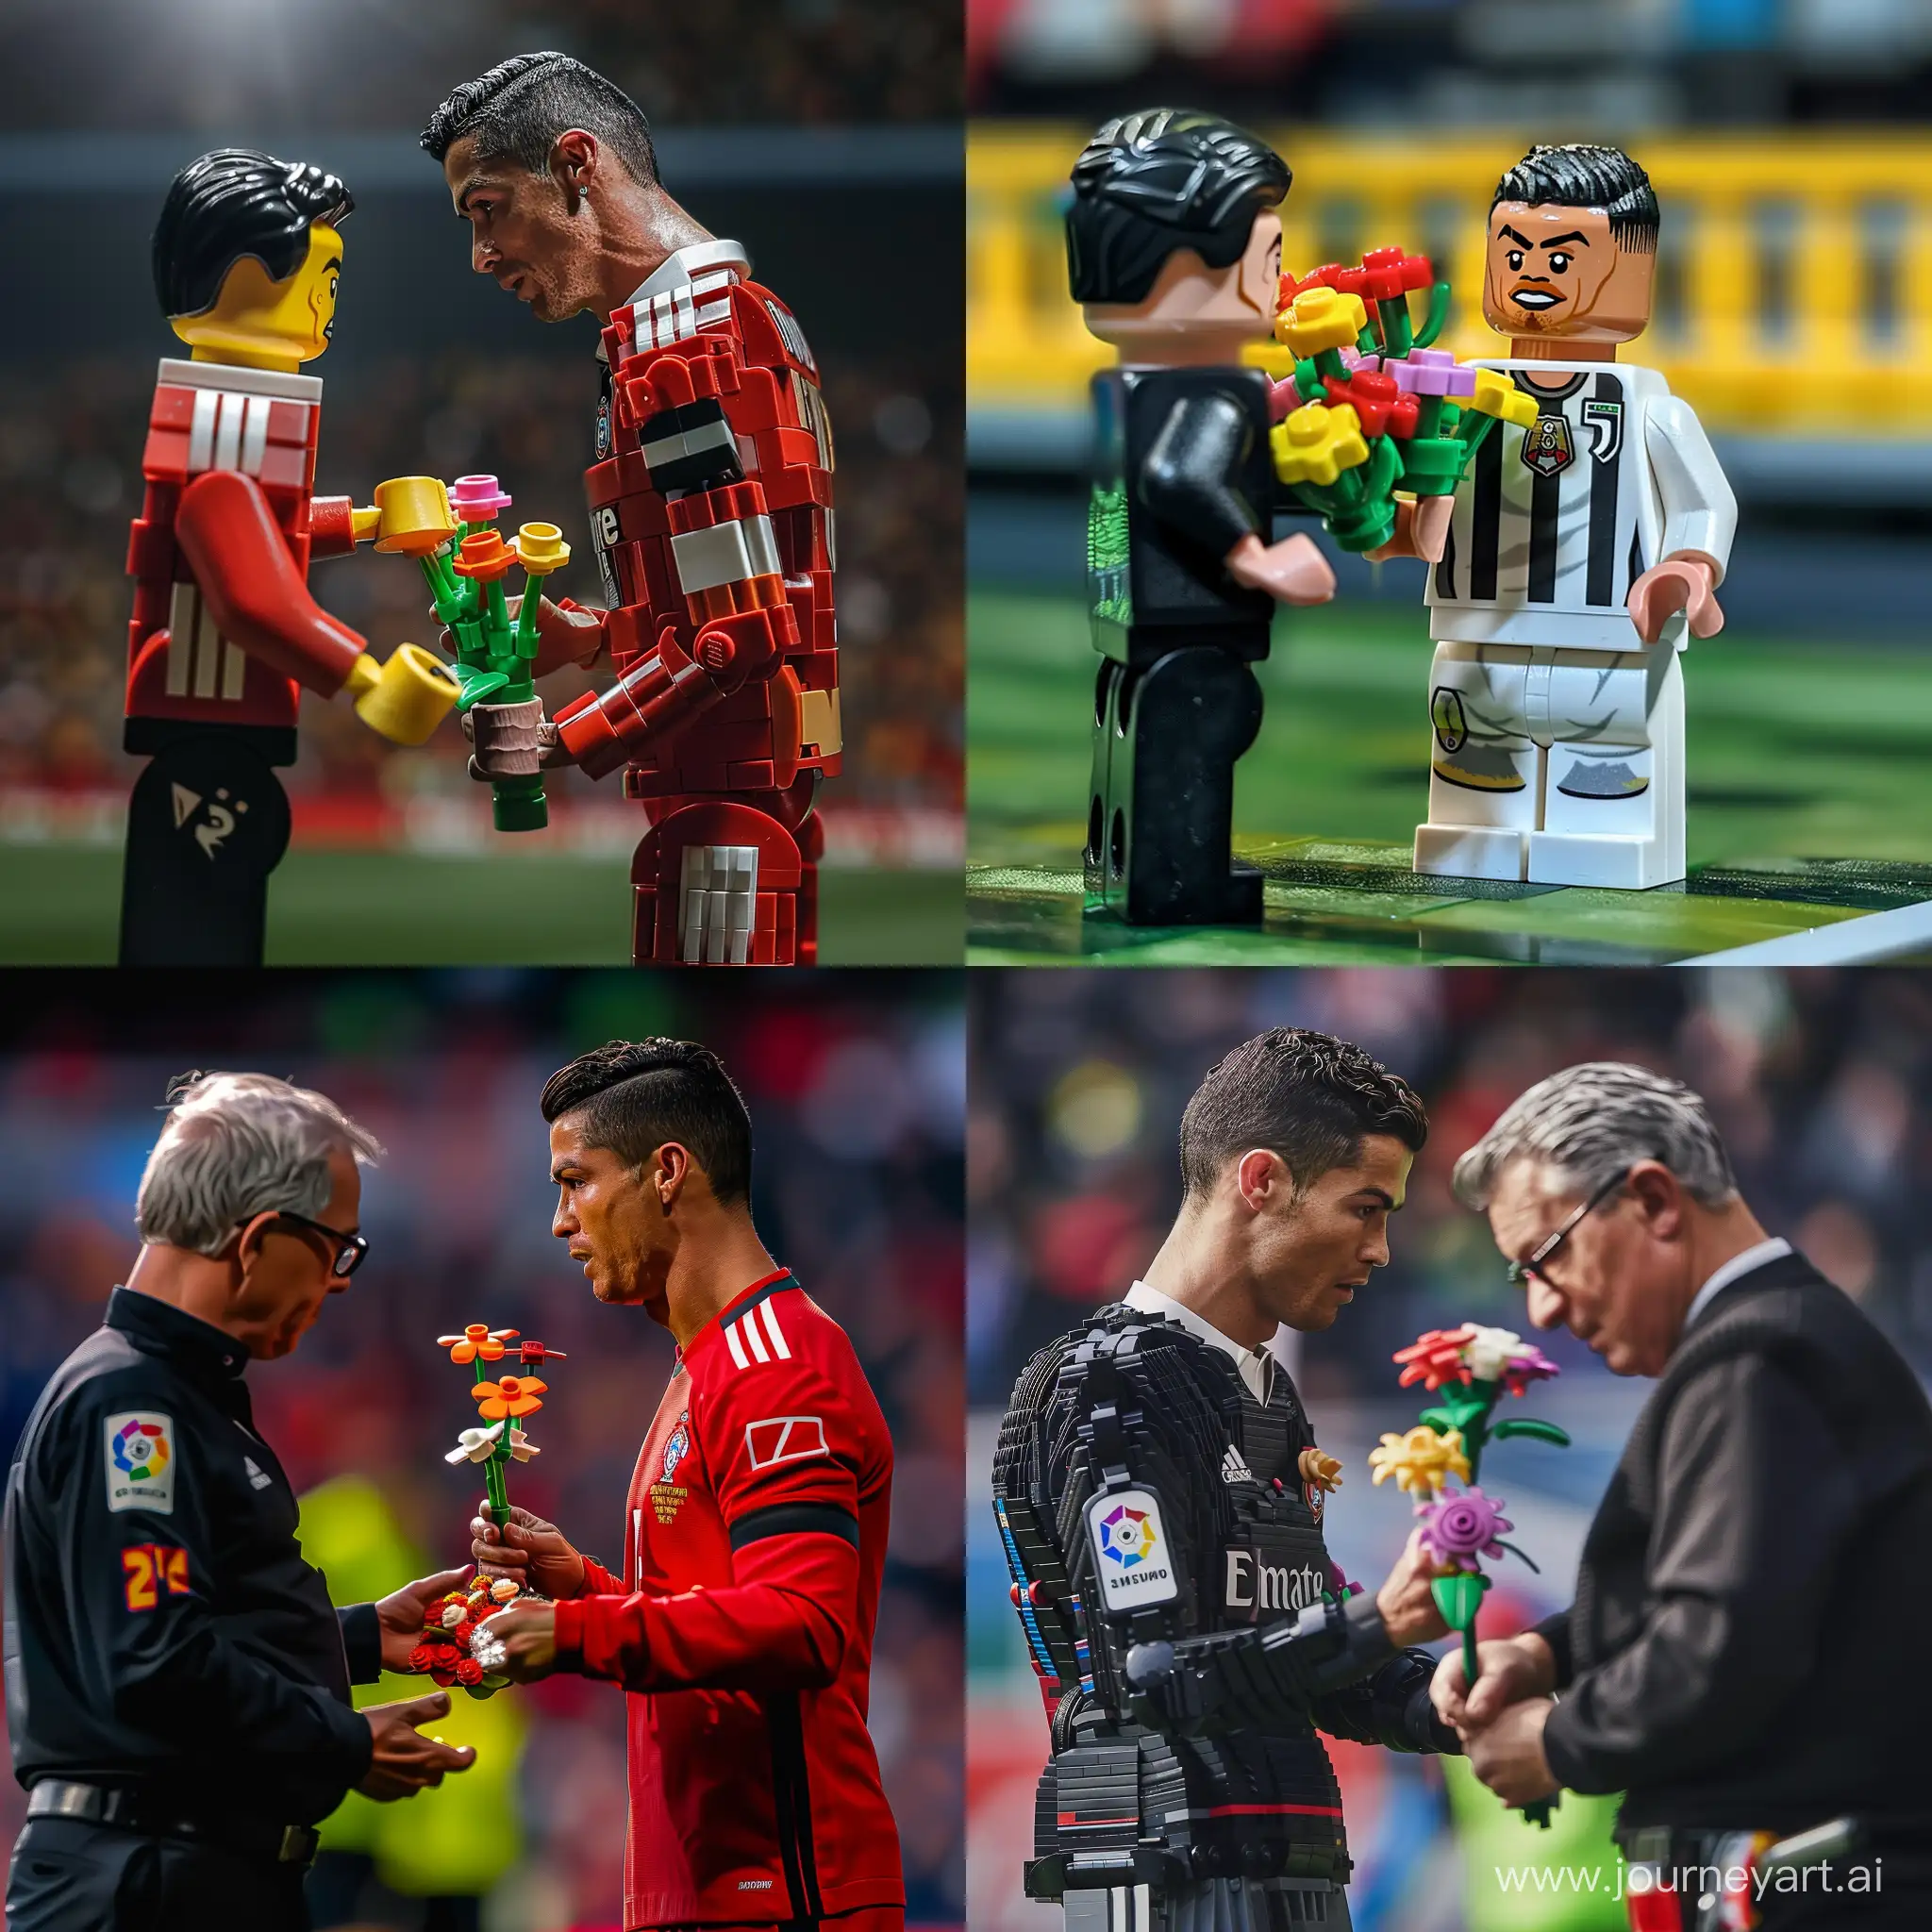 Realistic very detailed photo made on samsung s21 ronaldo on the pitch holding lego flowers in his hands and giving them to the referee